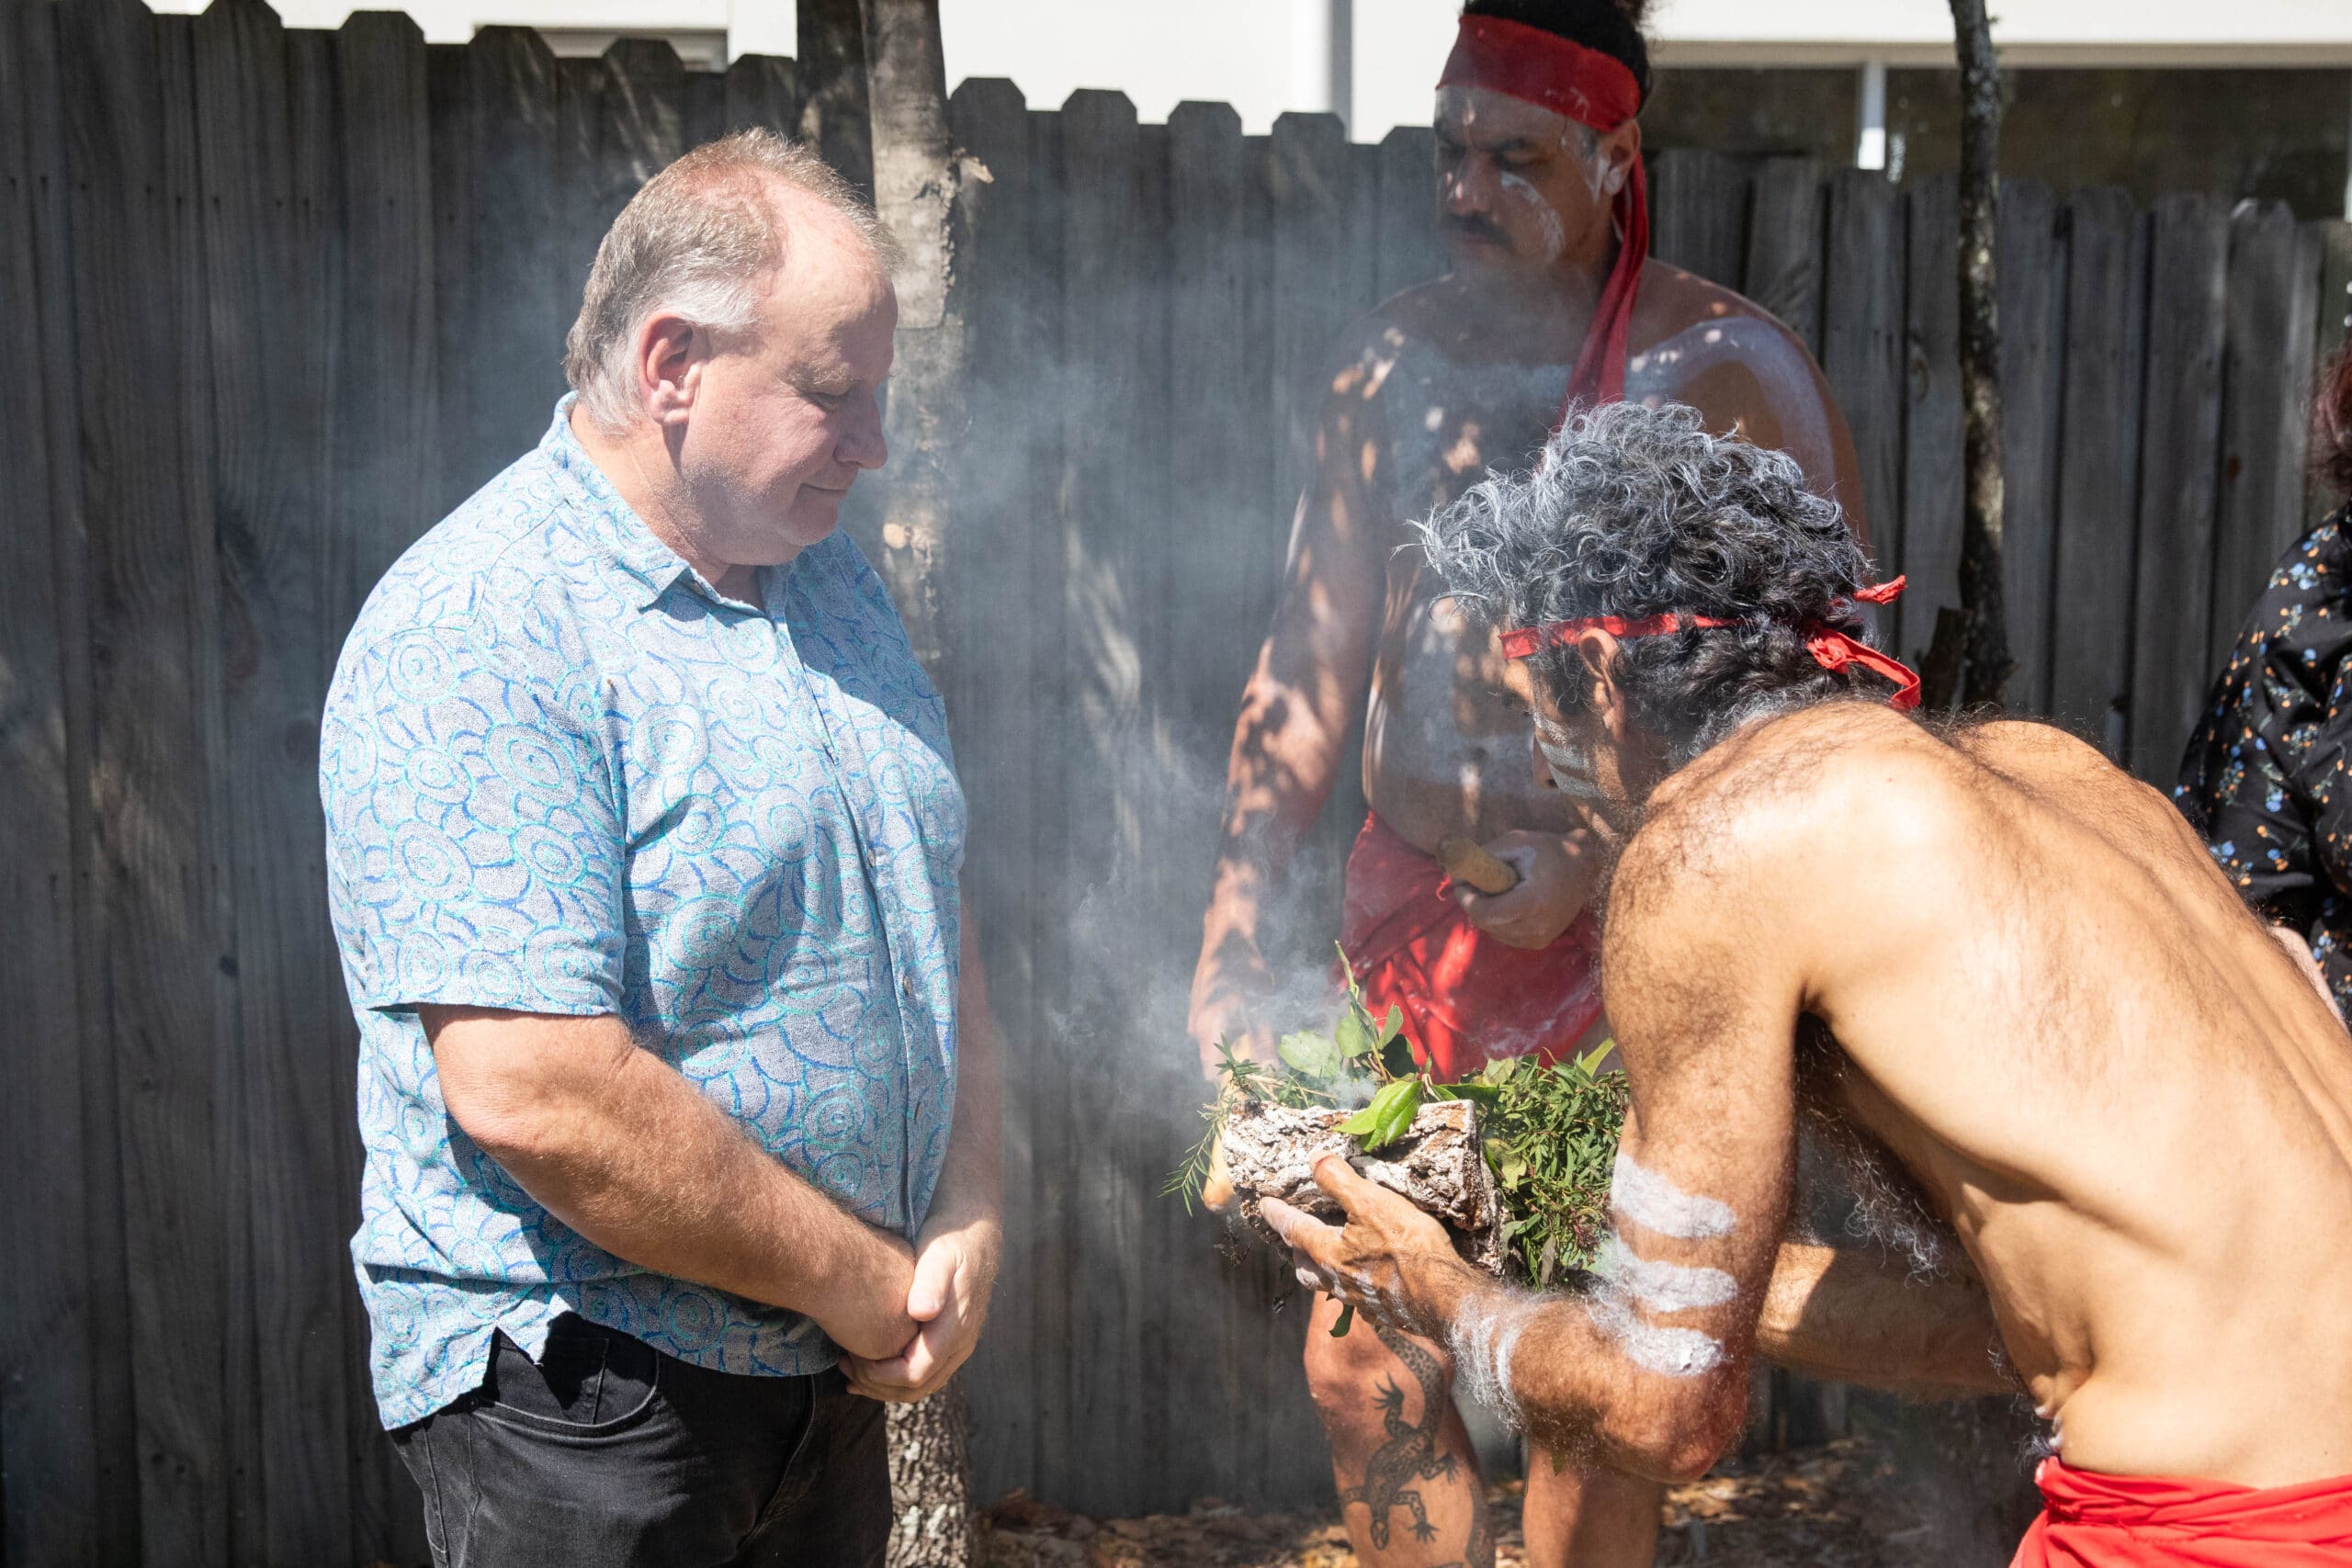 Two Aboriginal men and a white man participating in a traditional smoking ceremony